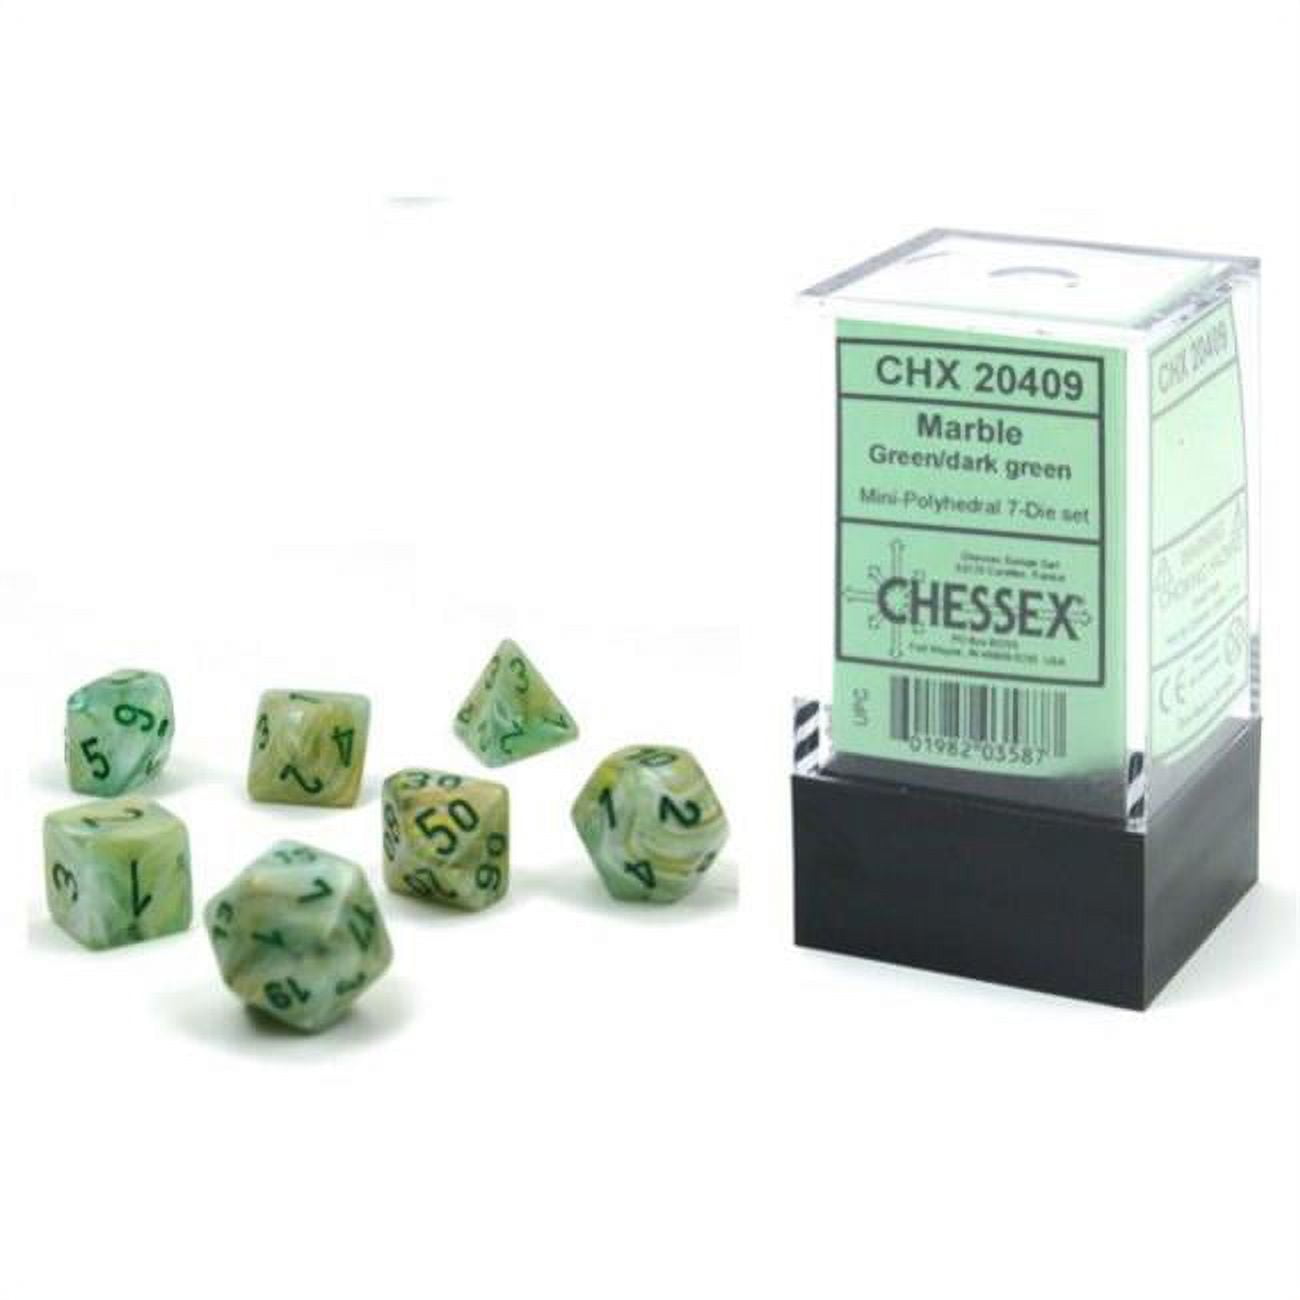 Picture of Chessex CHX20409 Cube Mini Marble Dice, Green with Dark Green Numbers - Set of 7